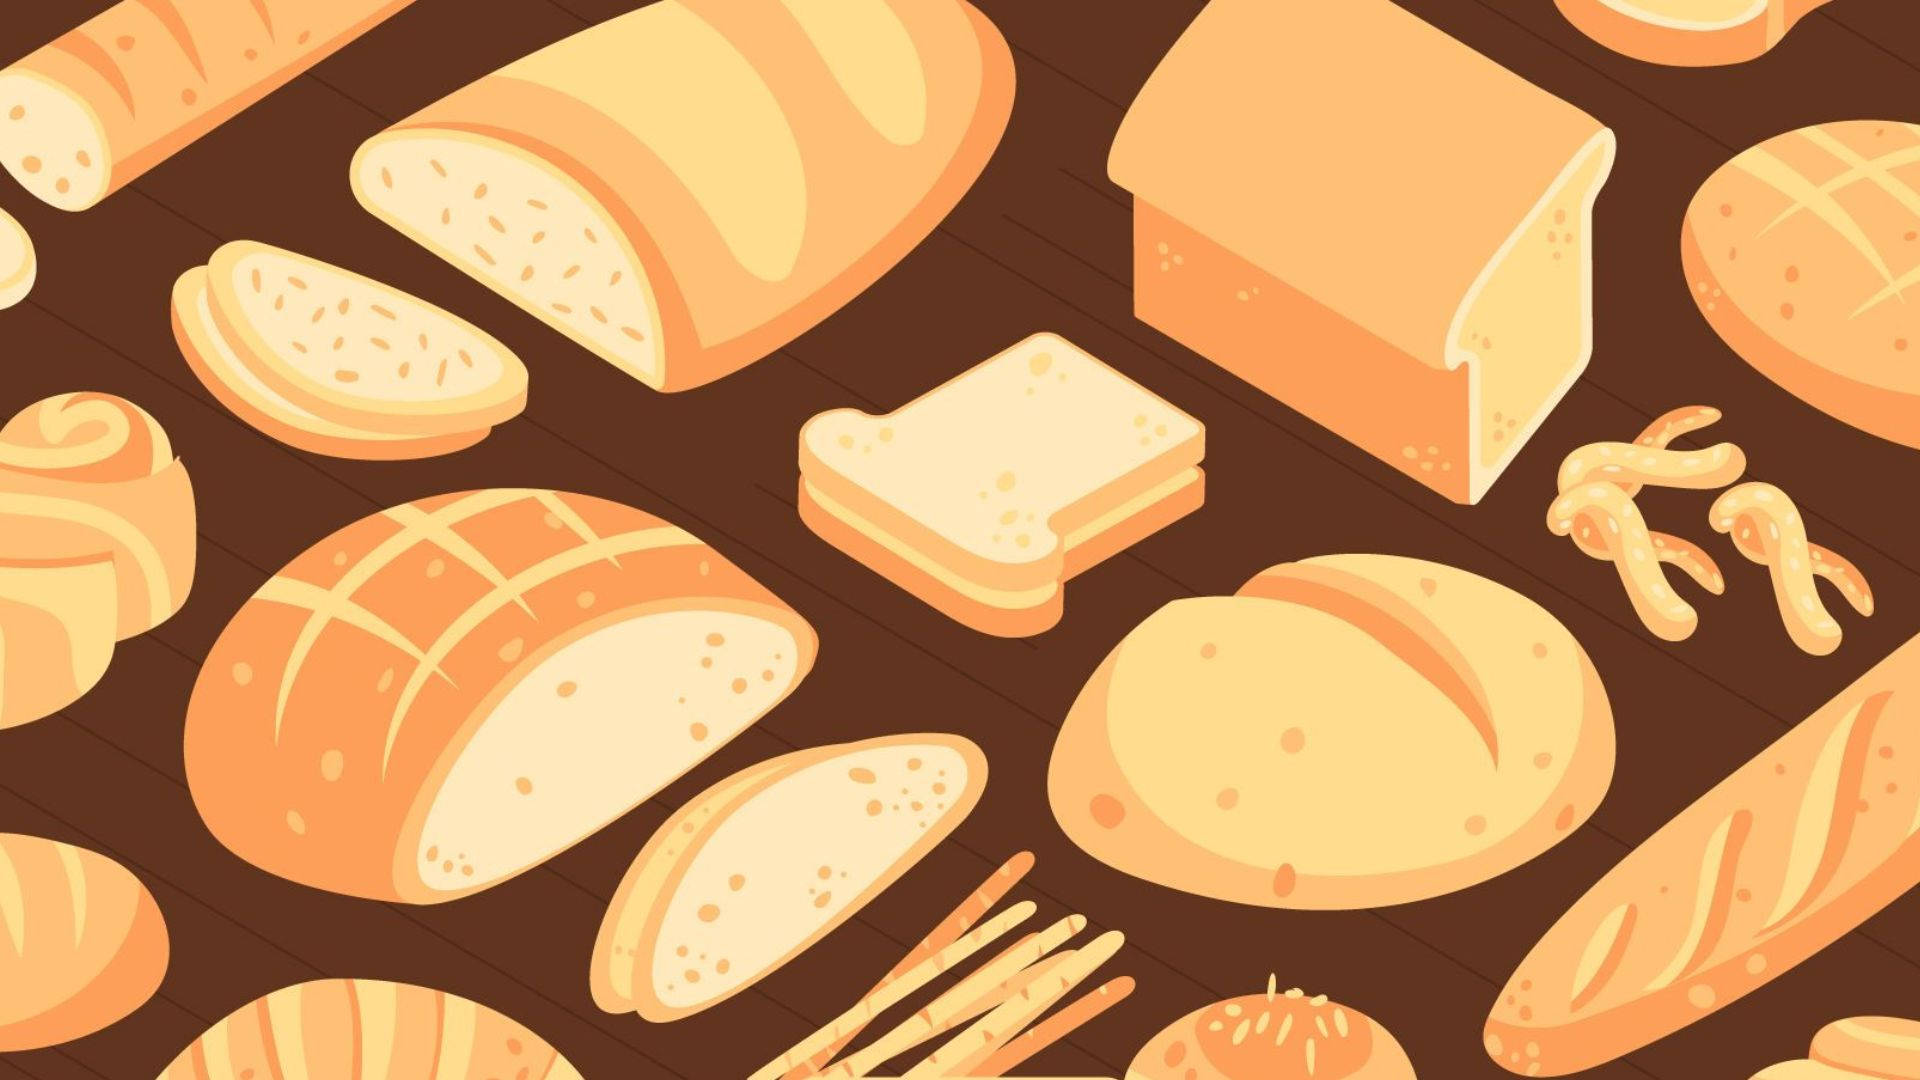 Animated Breads Background